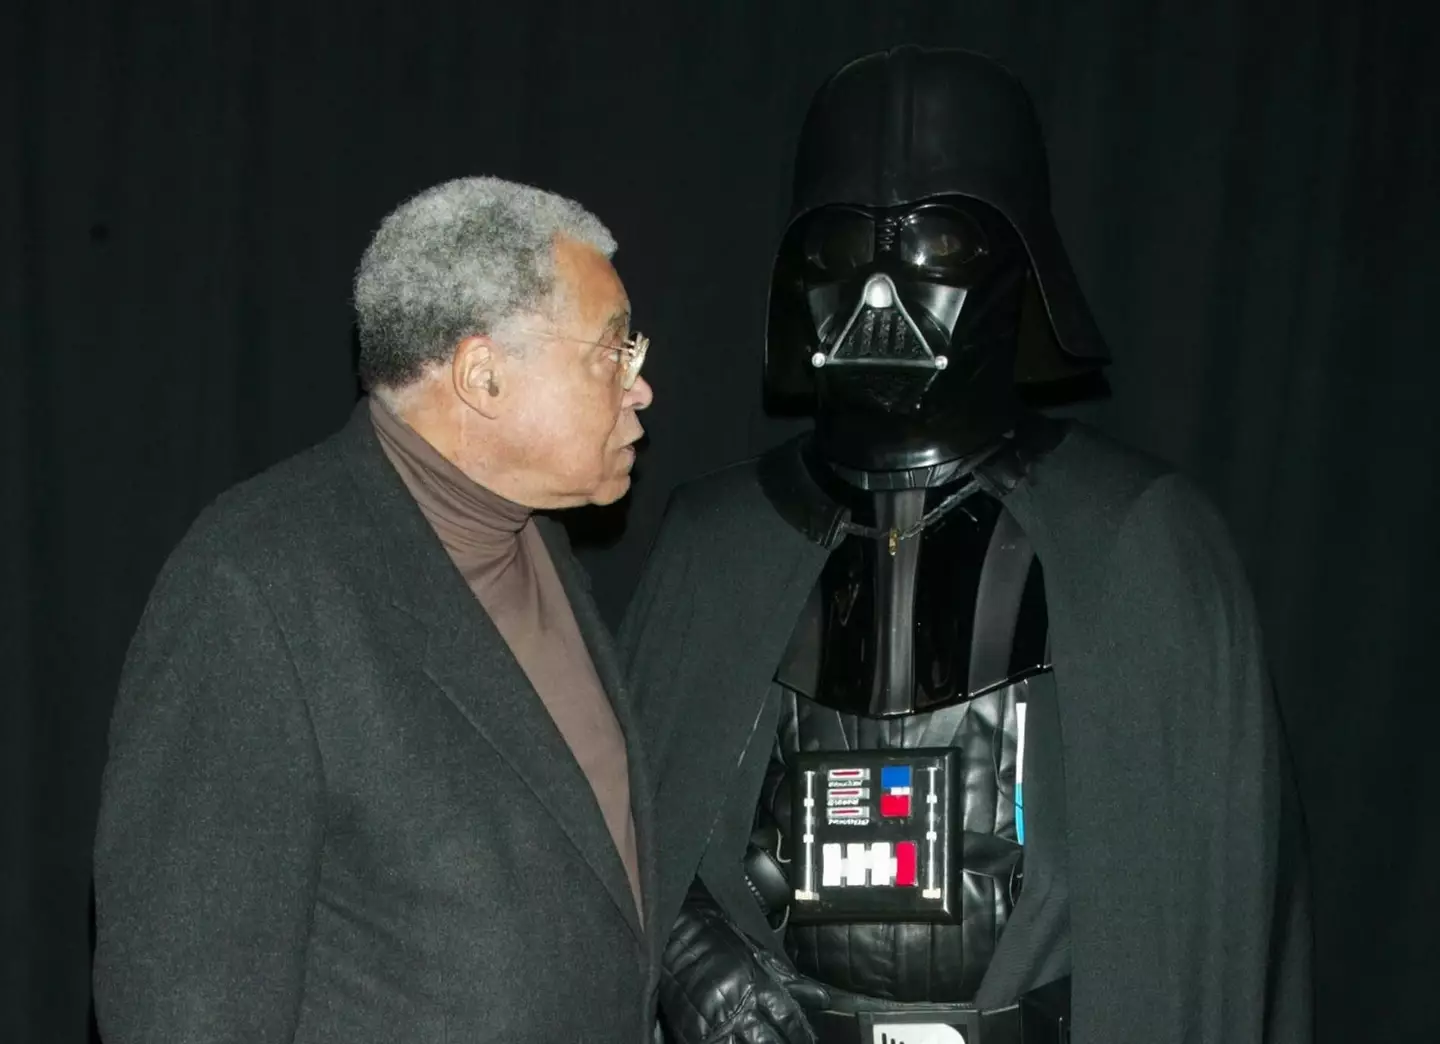 James Earl Jones provided the iconic voice of Vader, and has given Disney permission to recreate it with AI from now on.